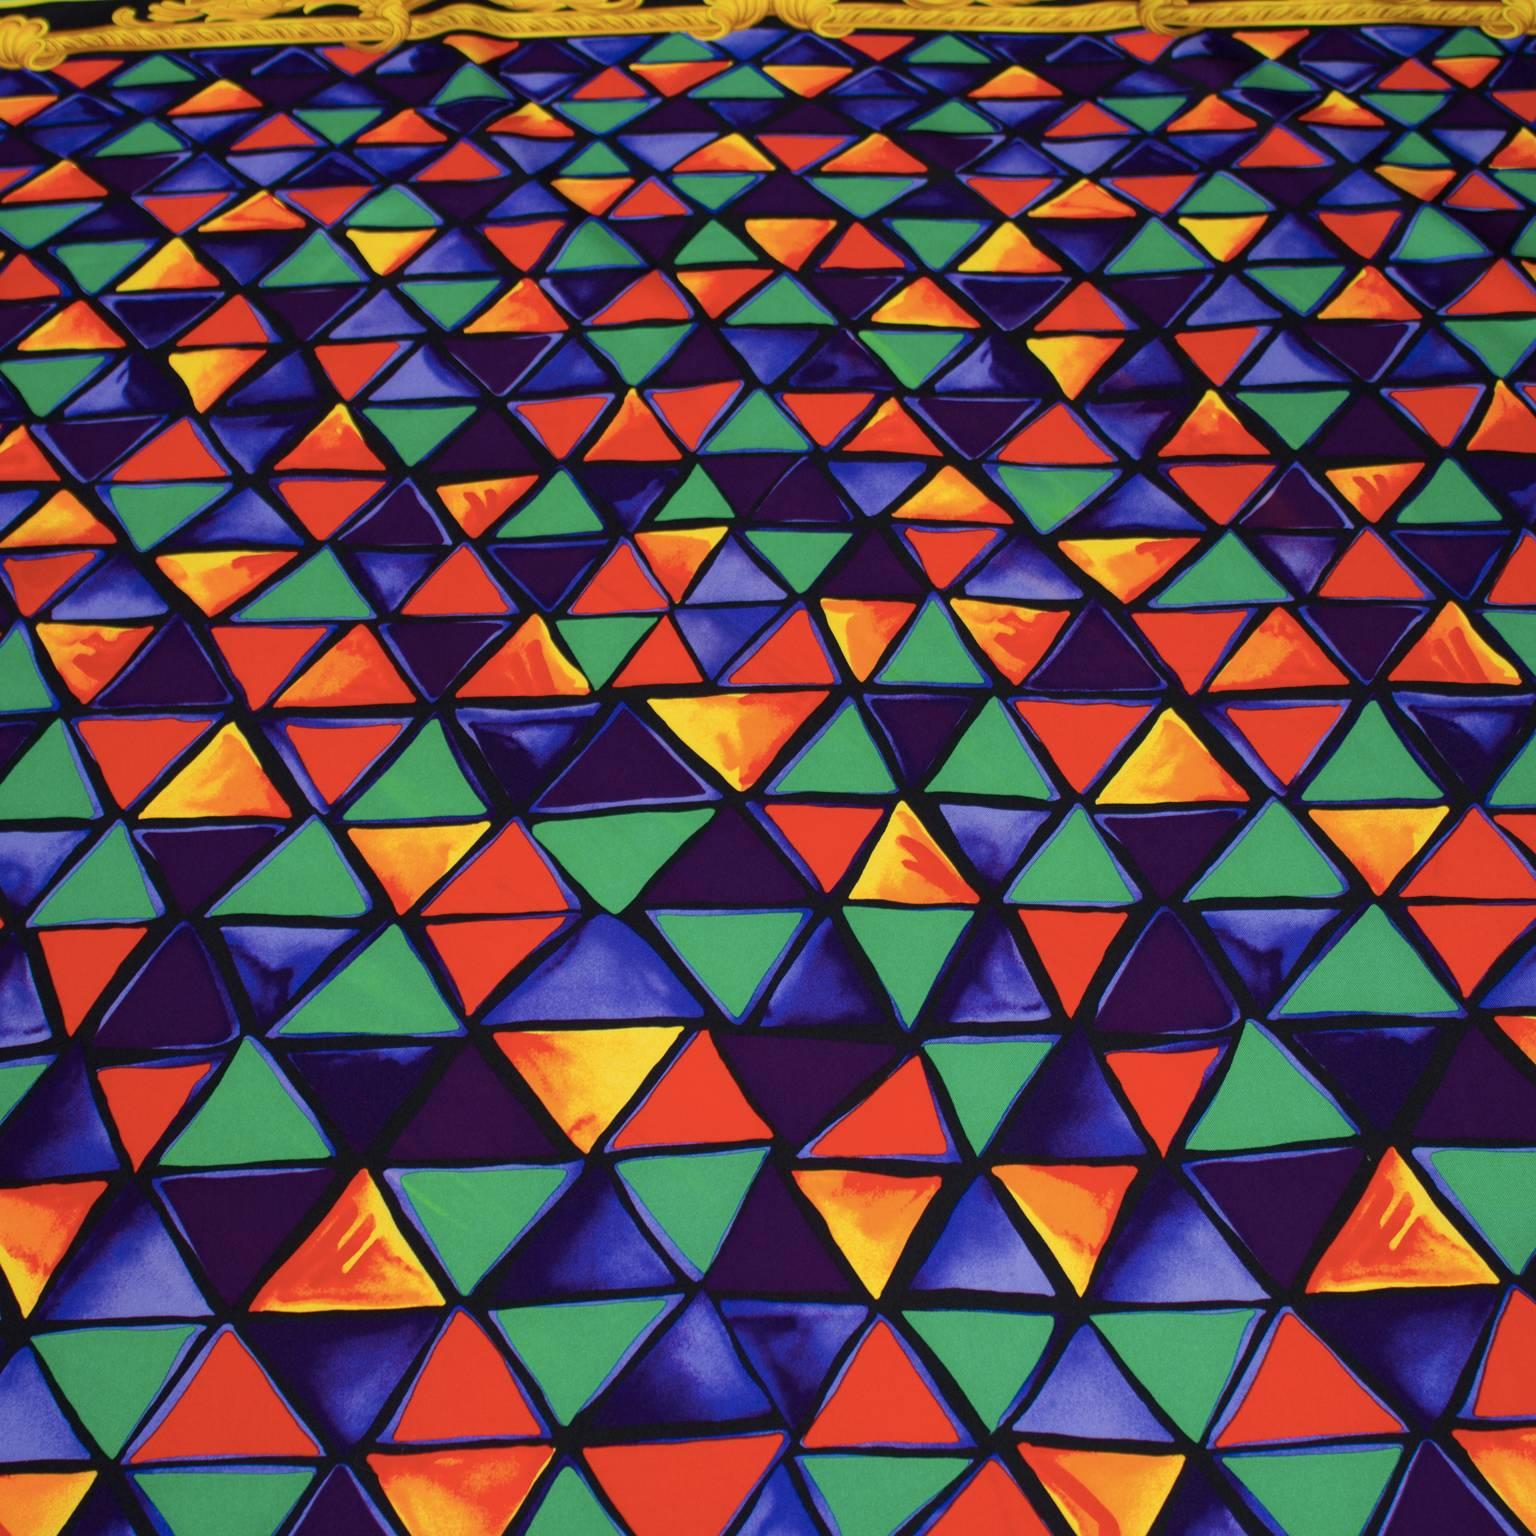 Triangular patterned jewel tone silk scarf by Versace circa1980's. The green, blue, orange and red triangles scale from small to large from top to bottom and are bordered in a gold frame. The scarf is finished with two borders; a dotted one